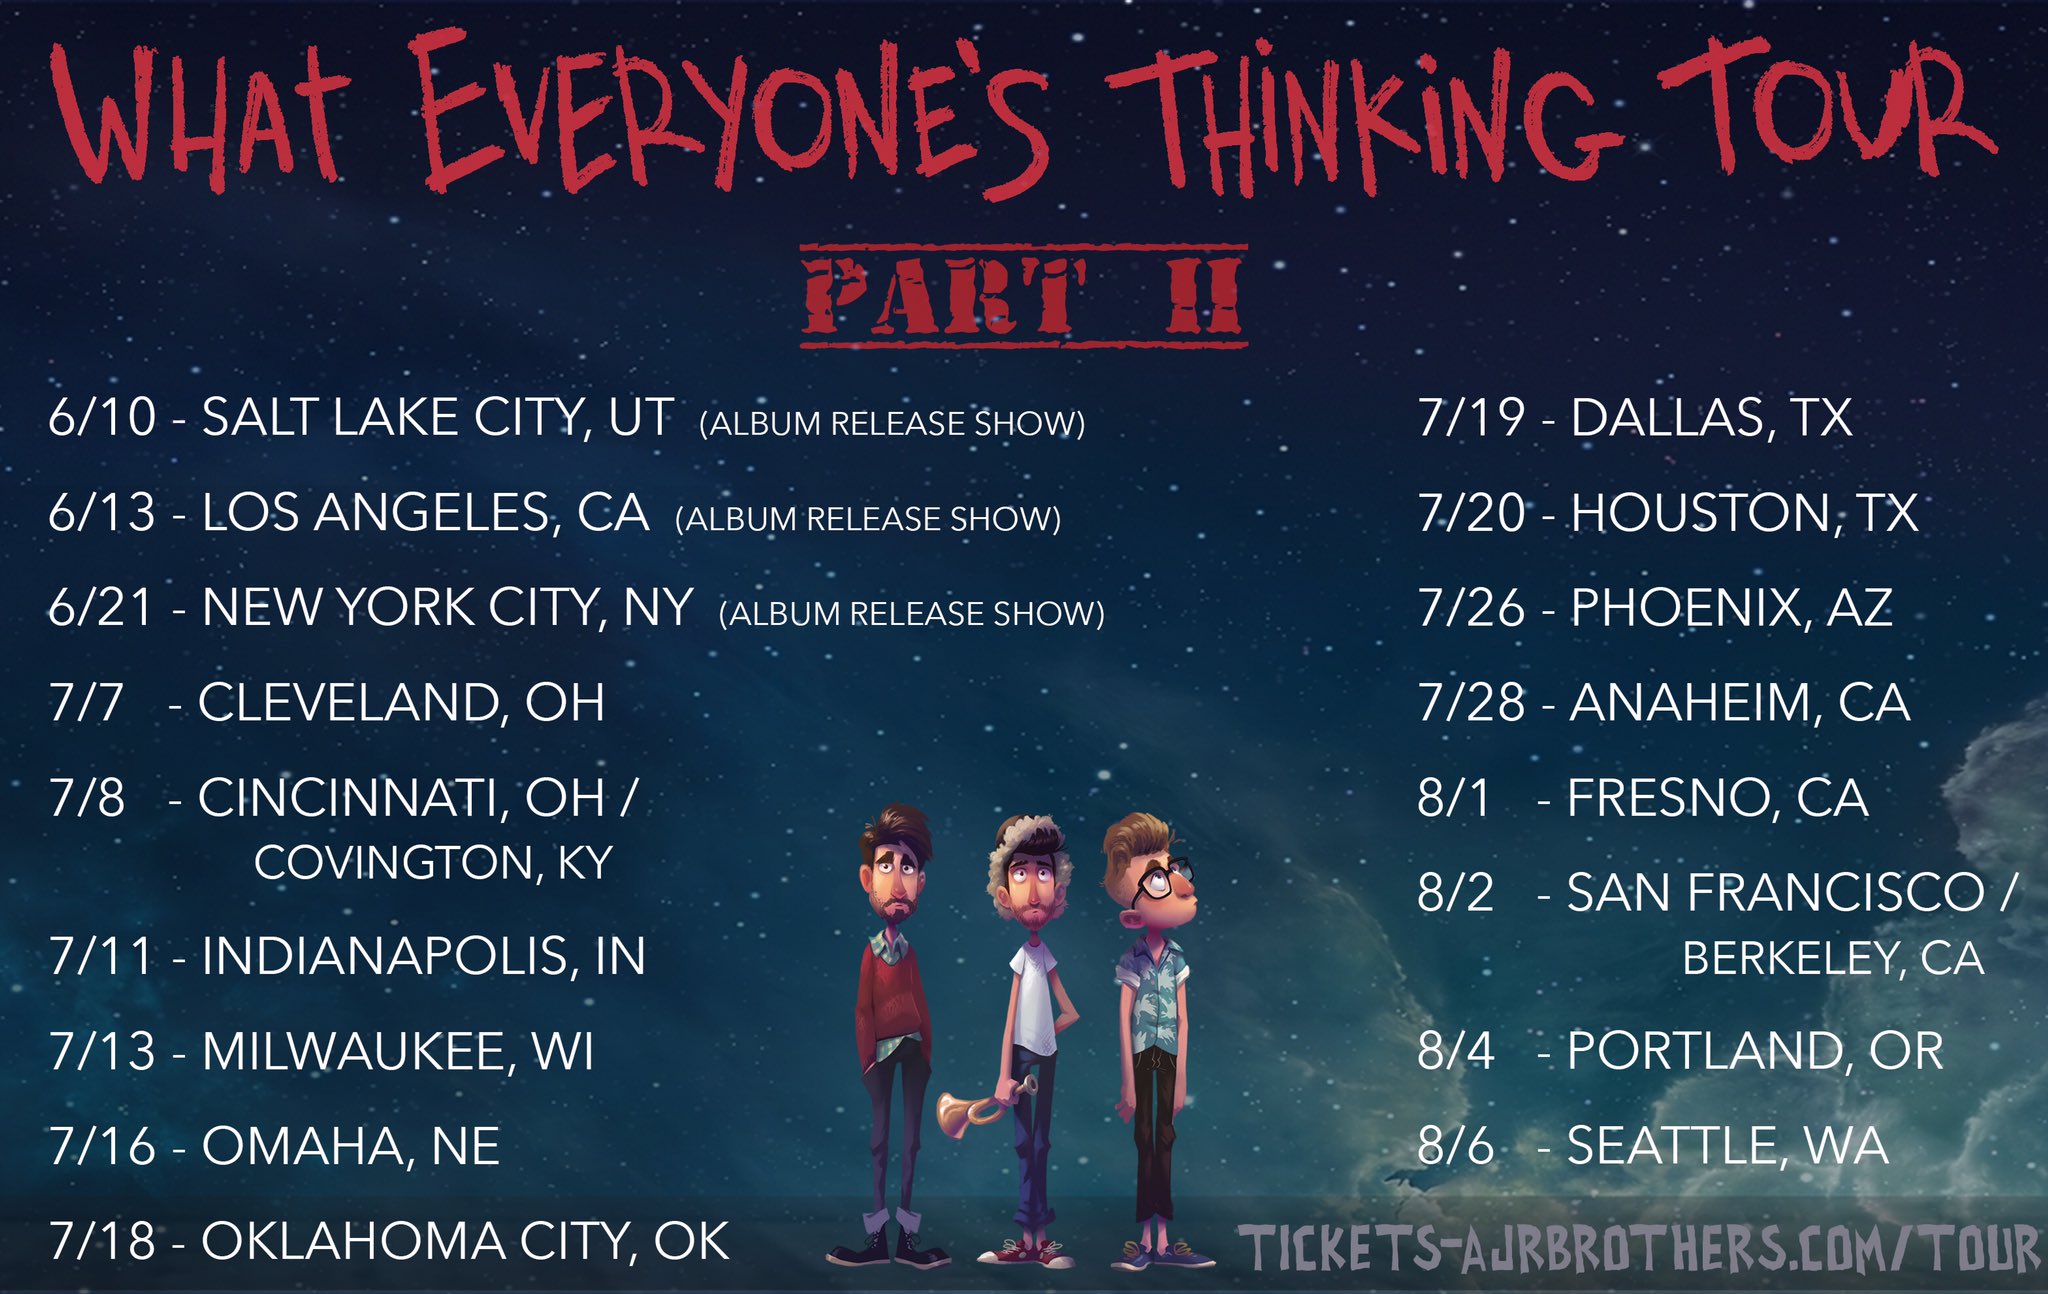 Ajr what everyones thinking tour album release show june 10 Ajr On Twitter What Everyone S Thinking Tour Tickets On Sale Now Last Tour Sold Out So Get Them Quick Https T Co Css4vfbckm Https T Co V1e5xpyncf Twitter